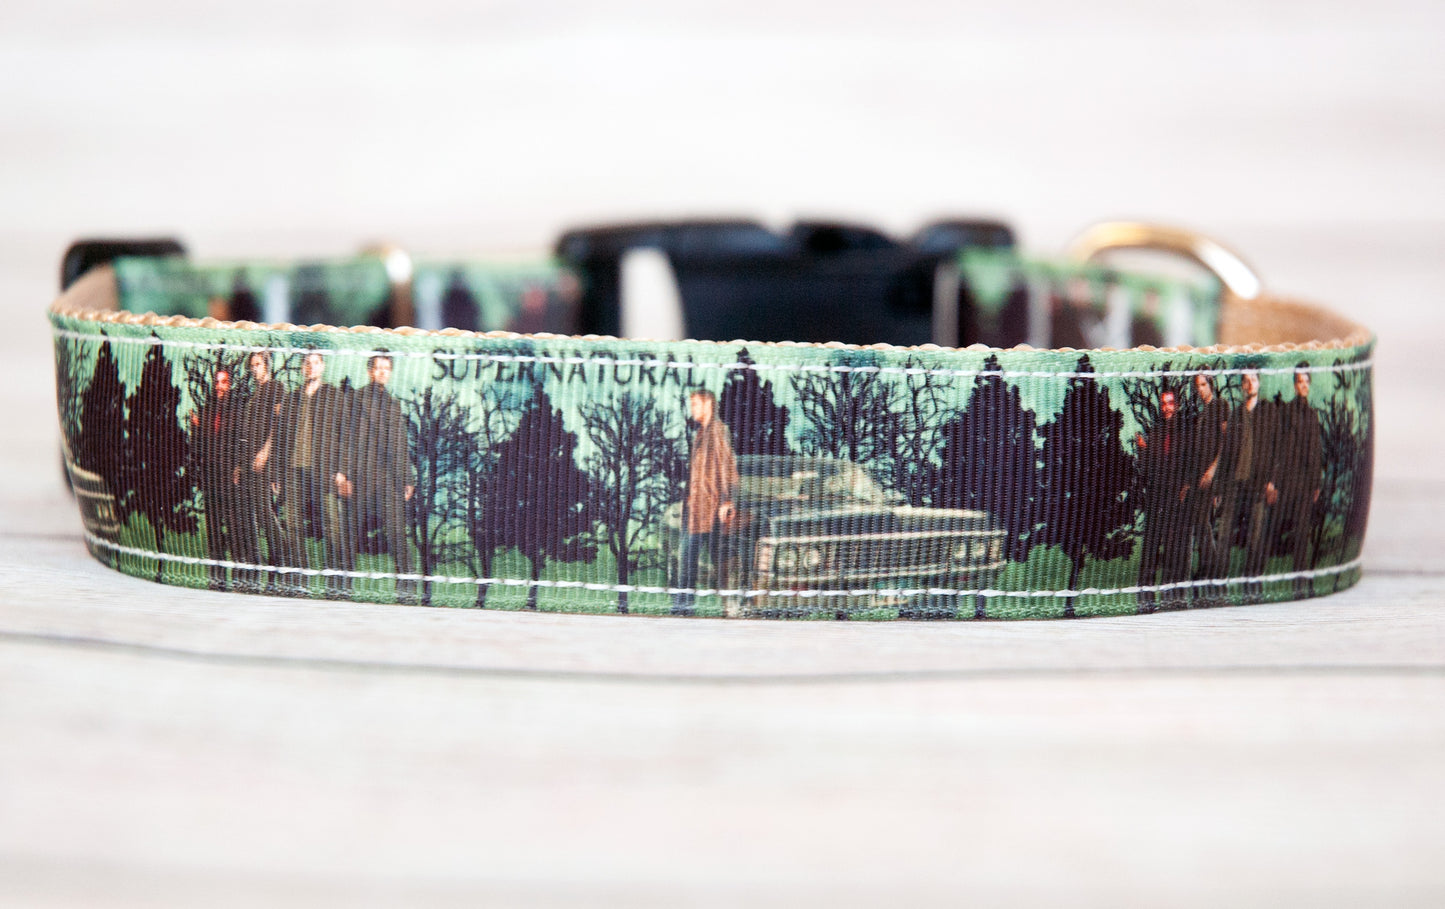 Supernatural green and black dog collar. 1 inch wide